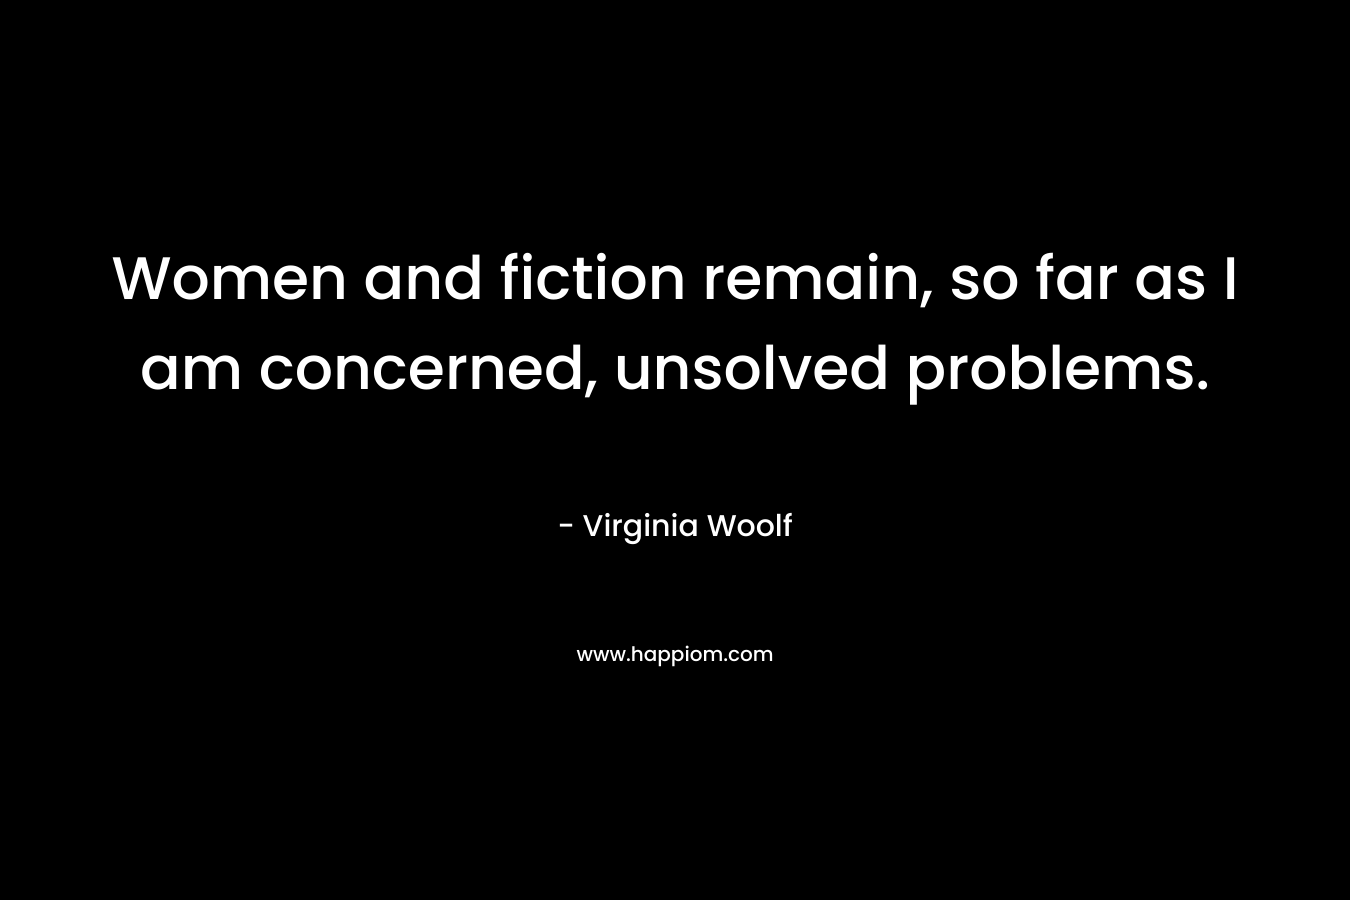 Women and fiction remain, so far as I am concerned, unsolved problems. – Virginia Woolf